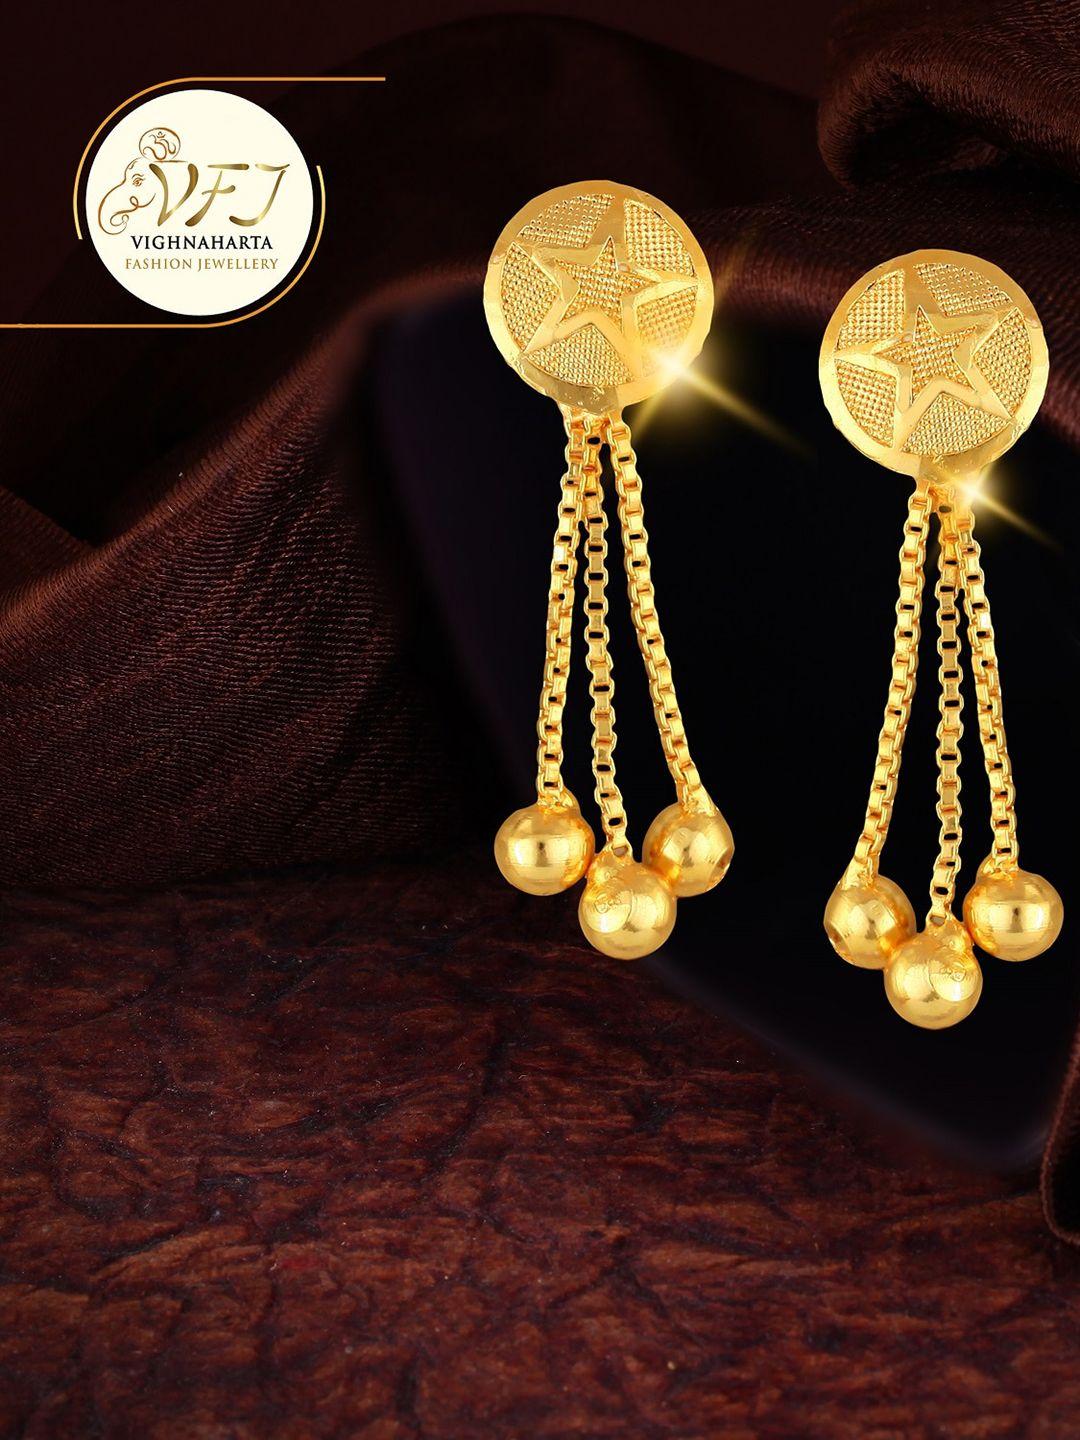 vighnaharta gold-plated floral studs with removable chain